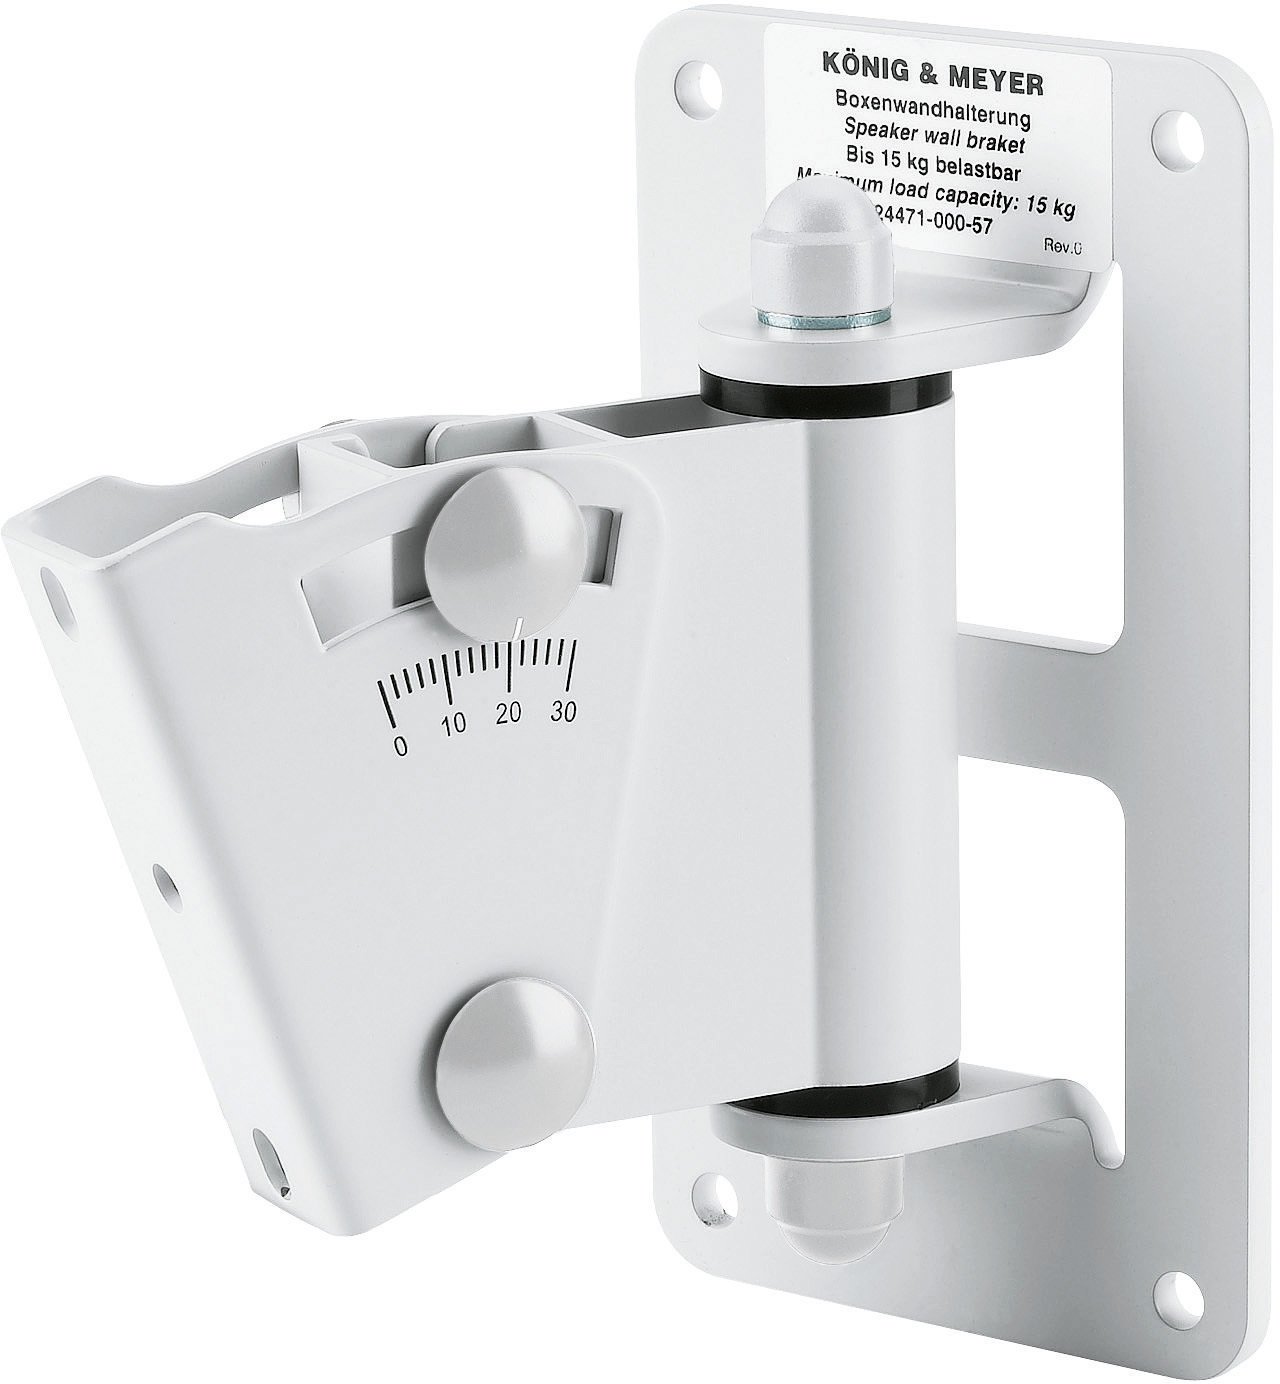 Wall mount for speakerboxes Konig & Meyer 24471  WH Wall mount for speakerboxes